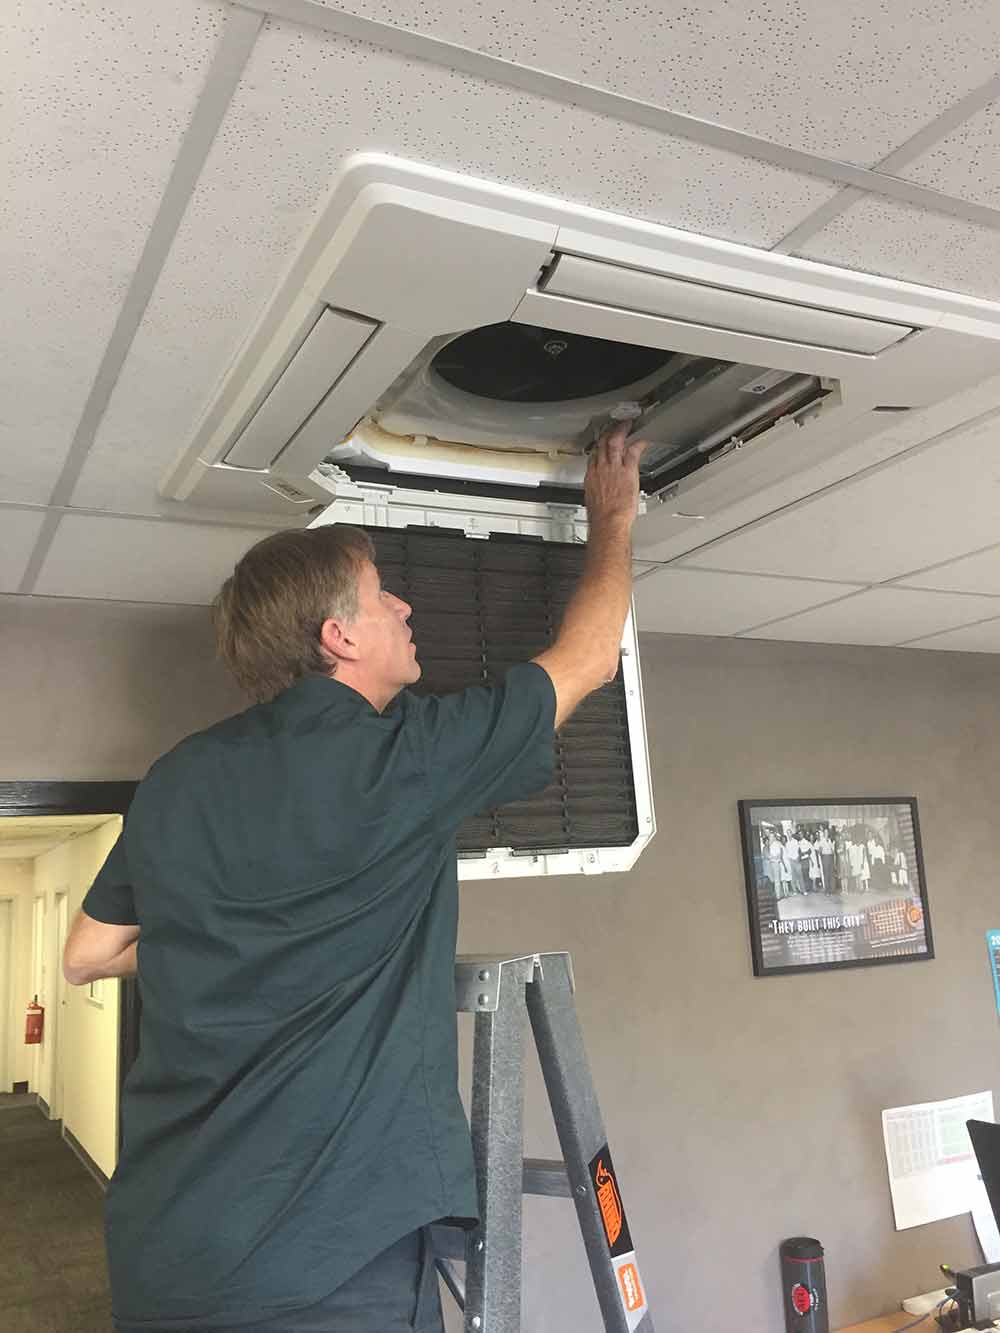 Air Conditioning Repair — Air Conditioning in Nightcliff, NT